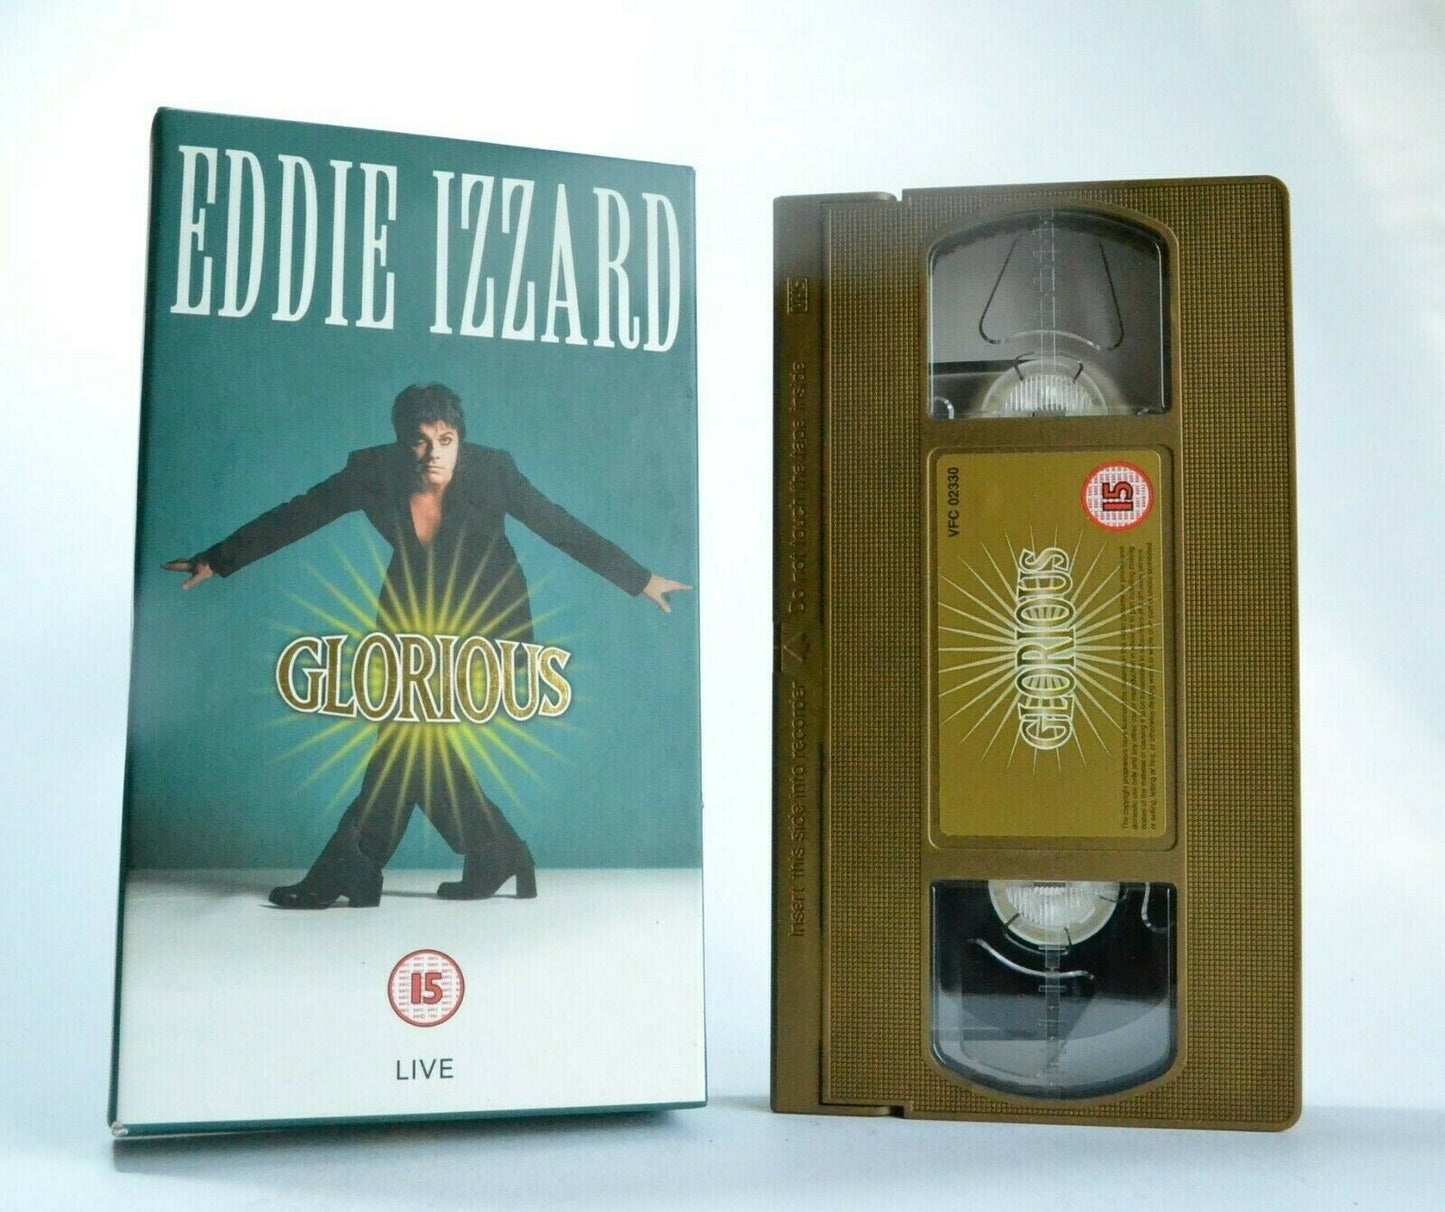 Eddie Izzard: Glorious - Carton Box - Live Performance - Stand-Up - Comedy - VHS-